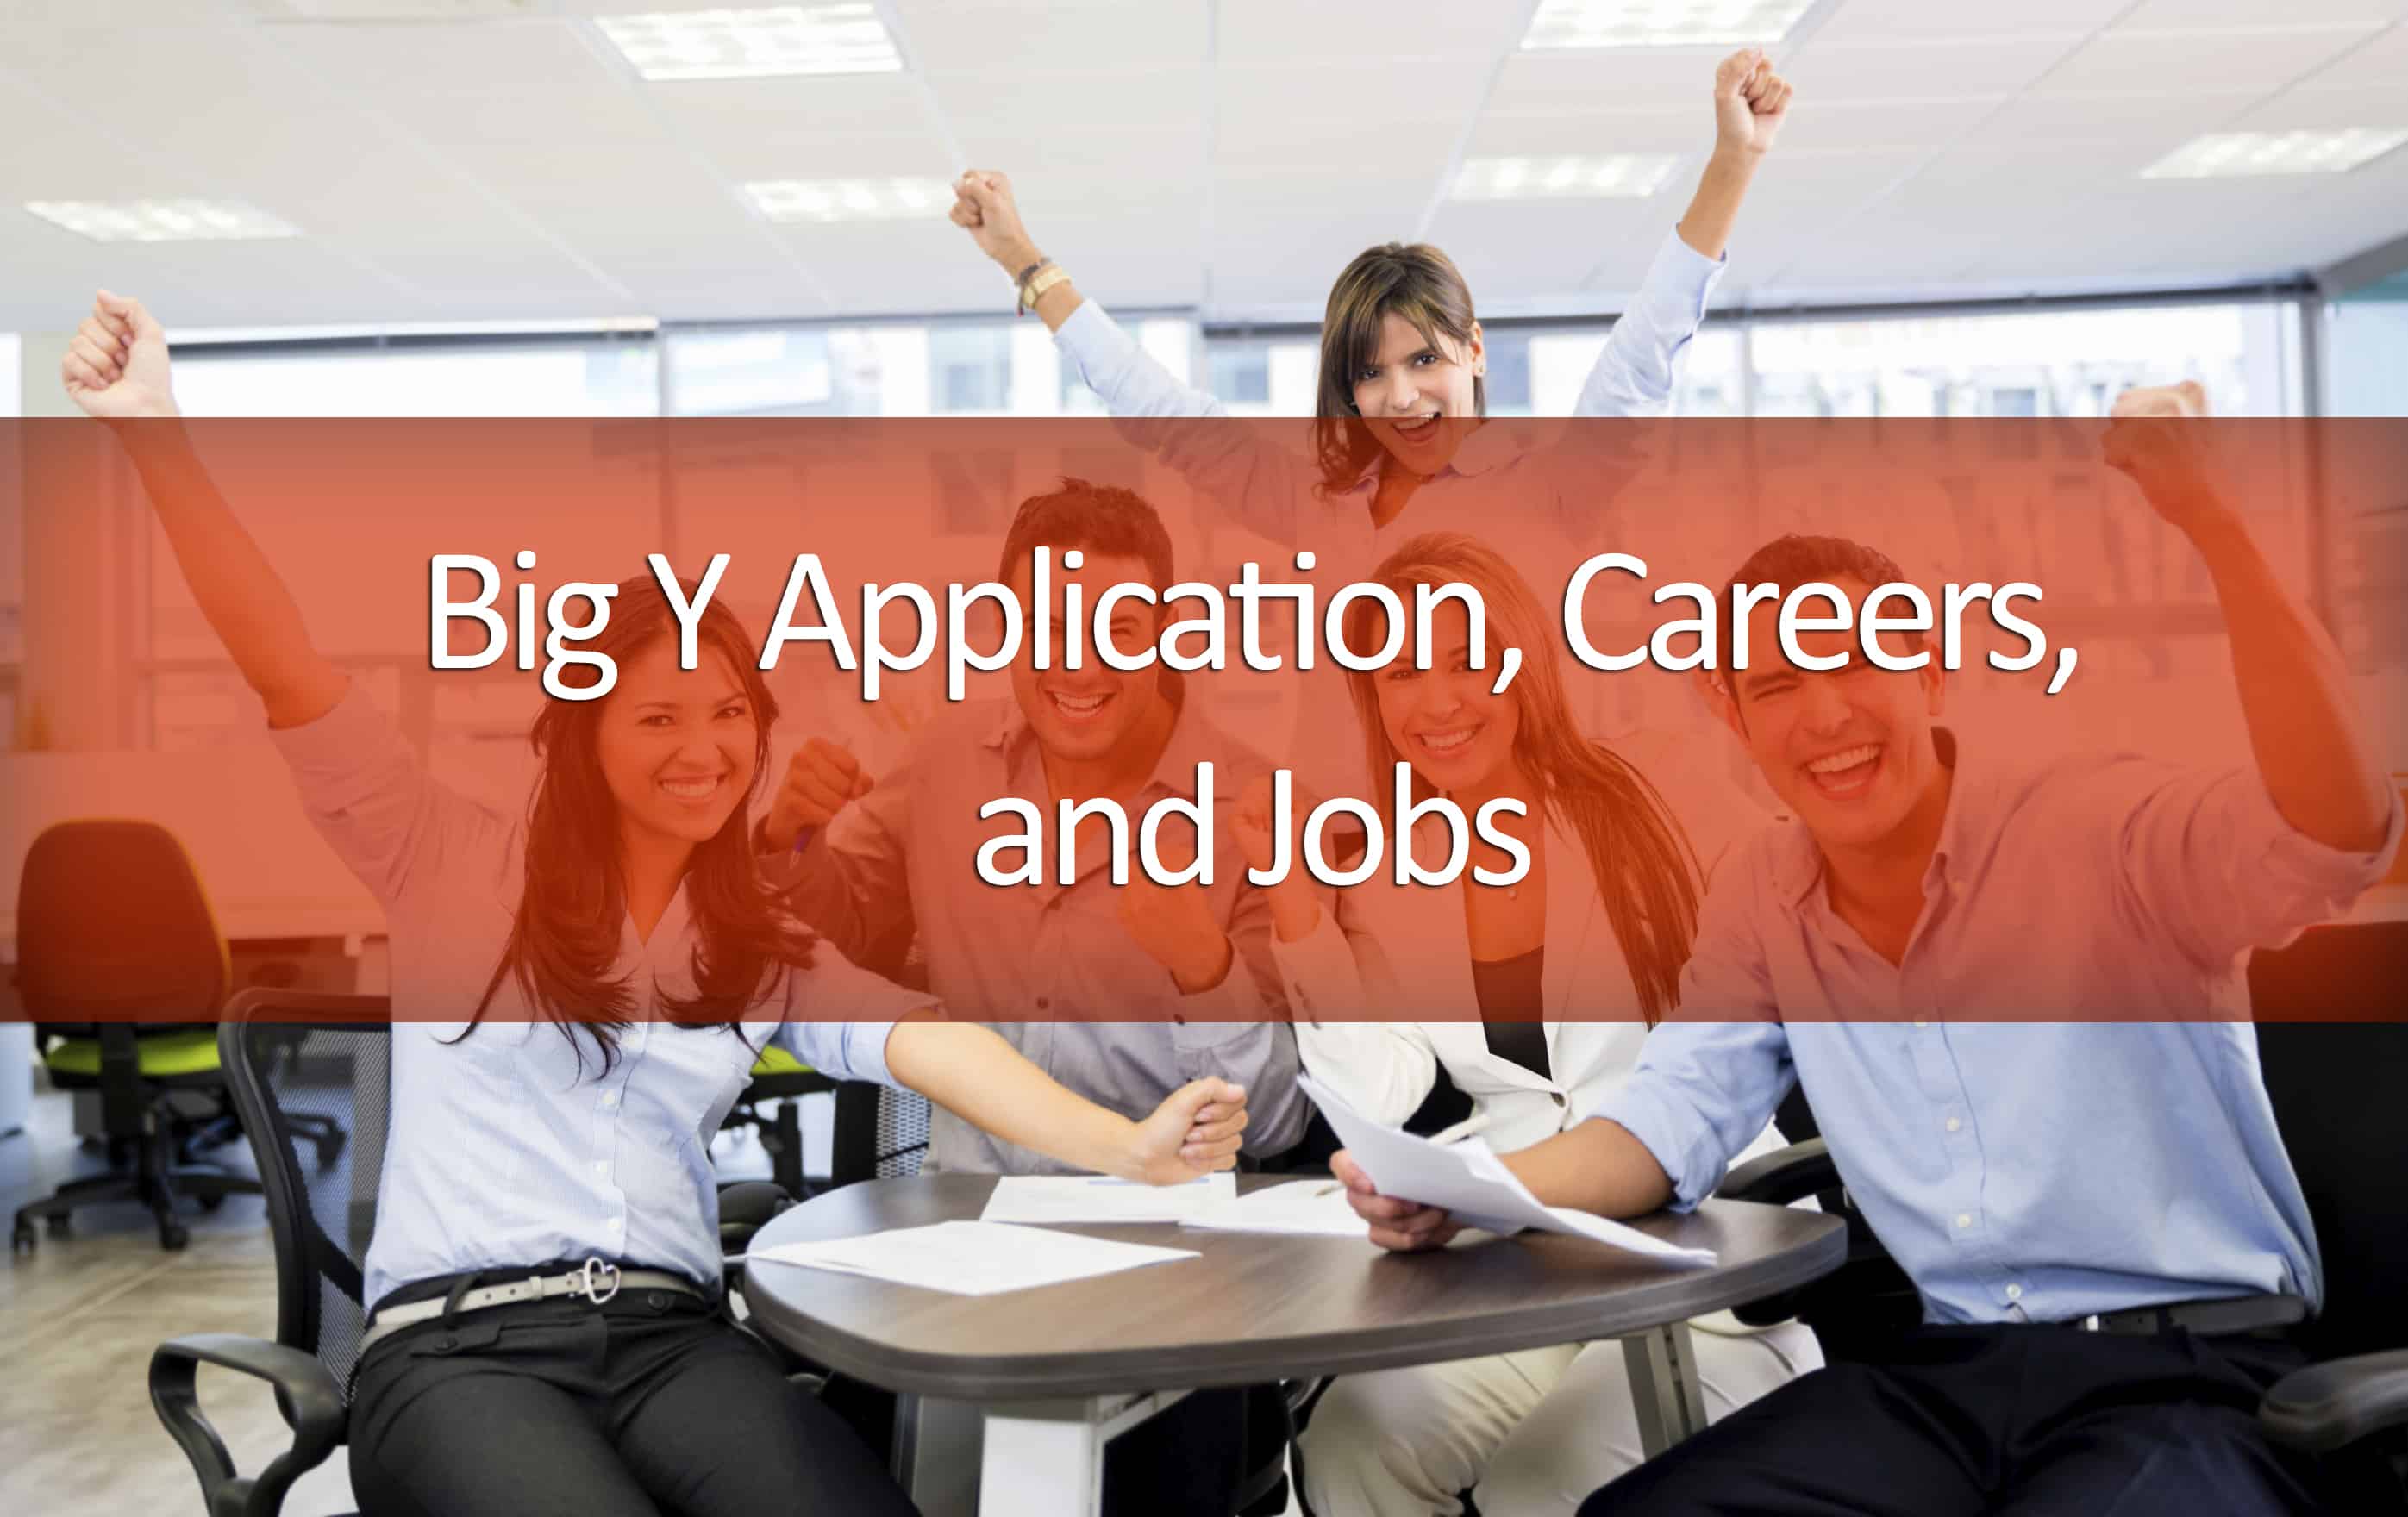 Big Y Application, Careers, and Jobs